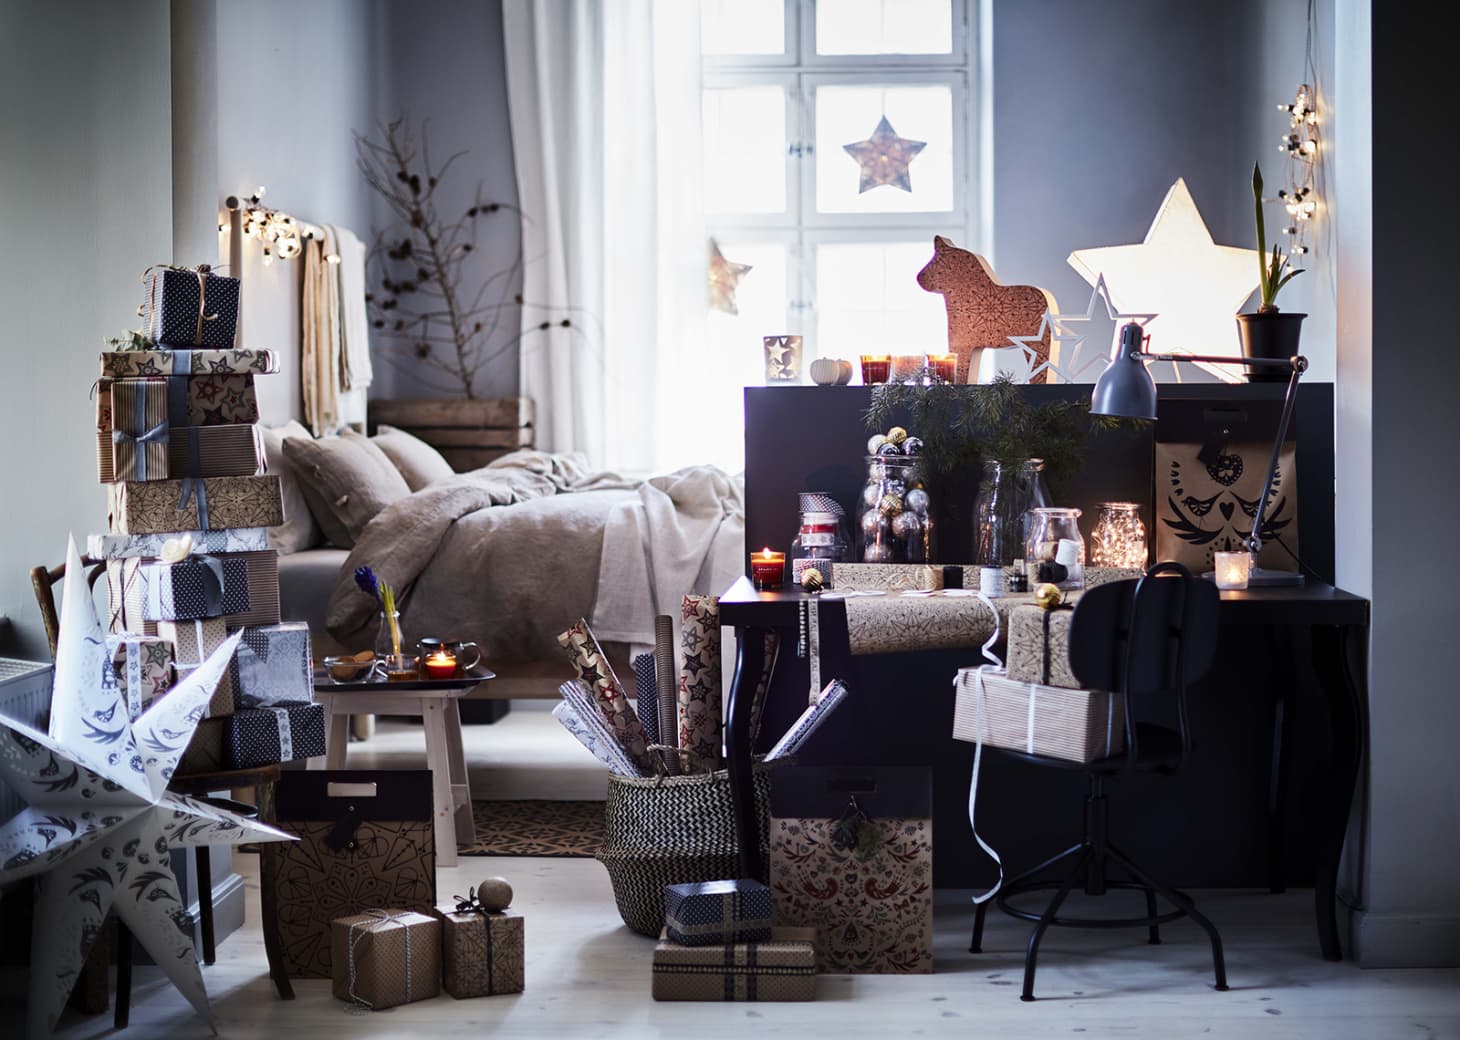 IKEA Holiday Decorating Ideas To Steal Apartment Therapy